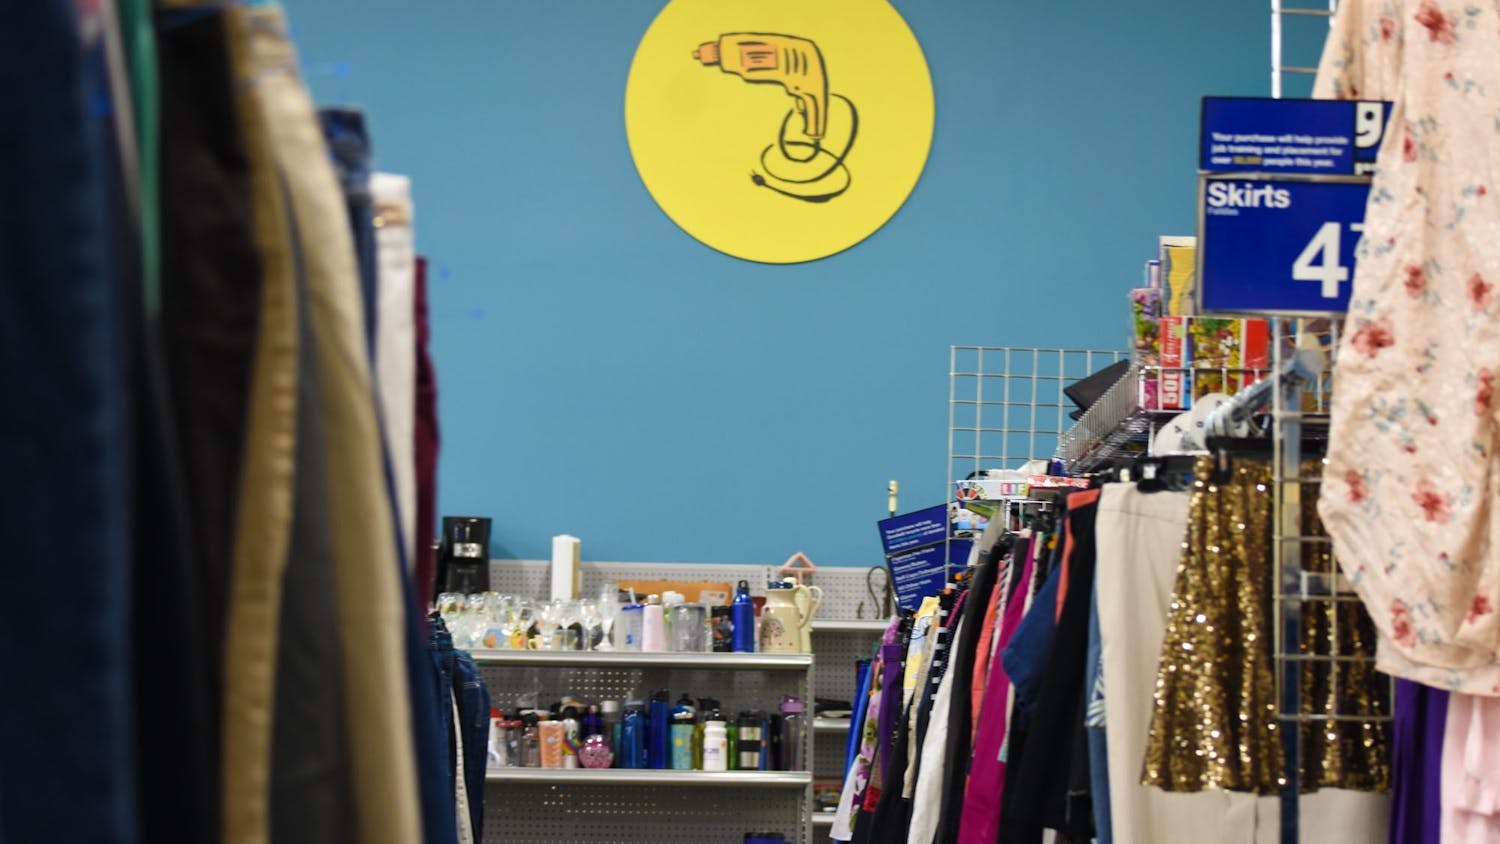 An aisle within a Goodwill retail store. The act of thrifting and the rise of secondhand-centered e-commerce apps have become popular among college students who seek to buy clothing at lower prices and combat unsustainable practices within the fashion industry.